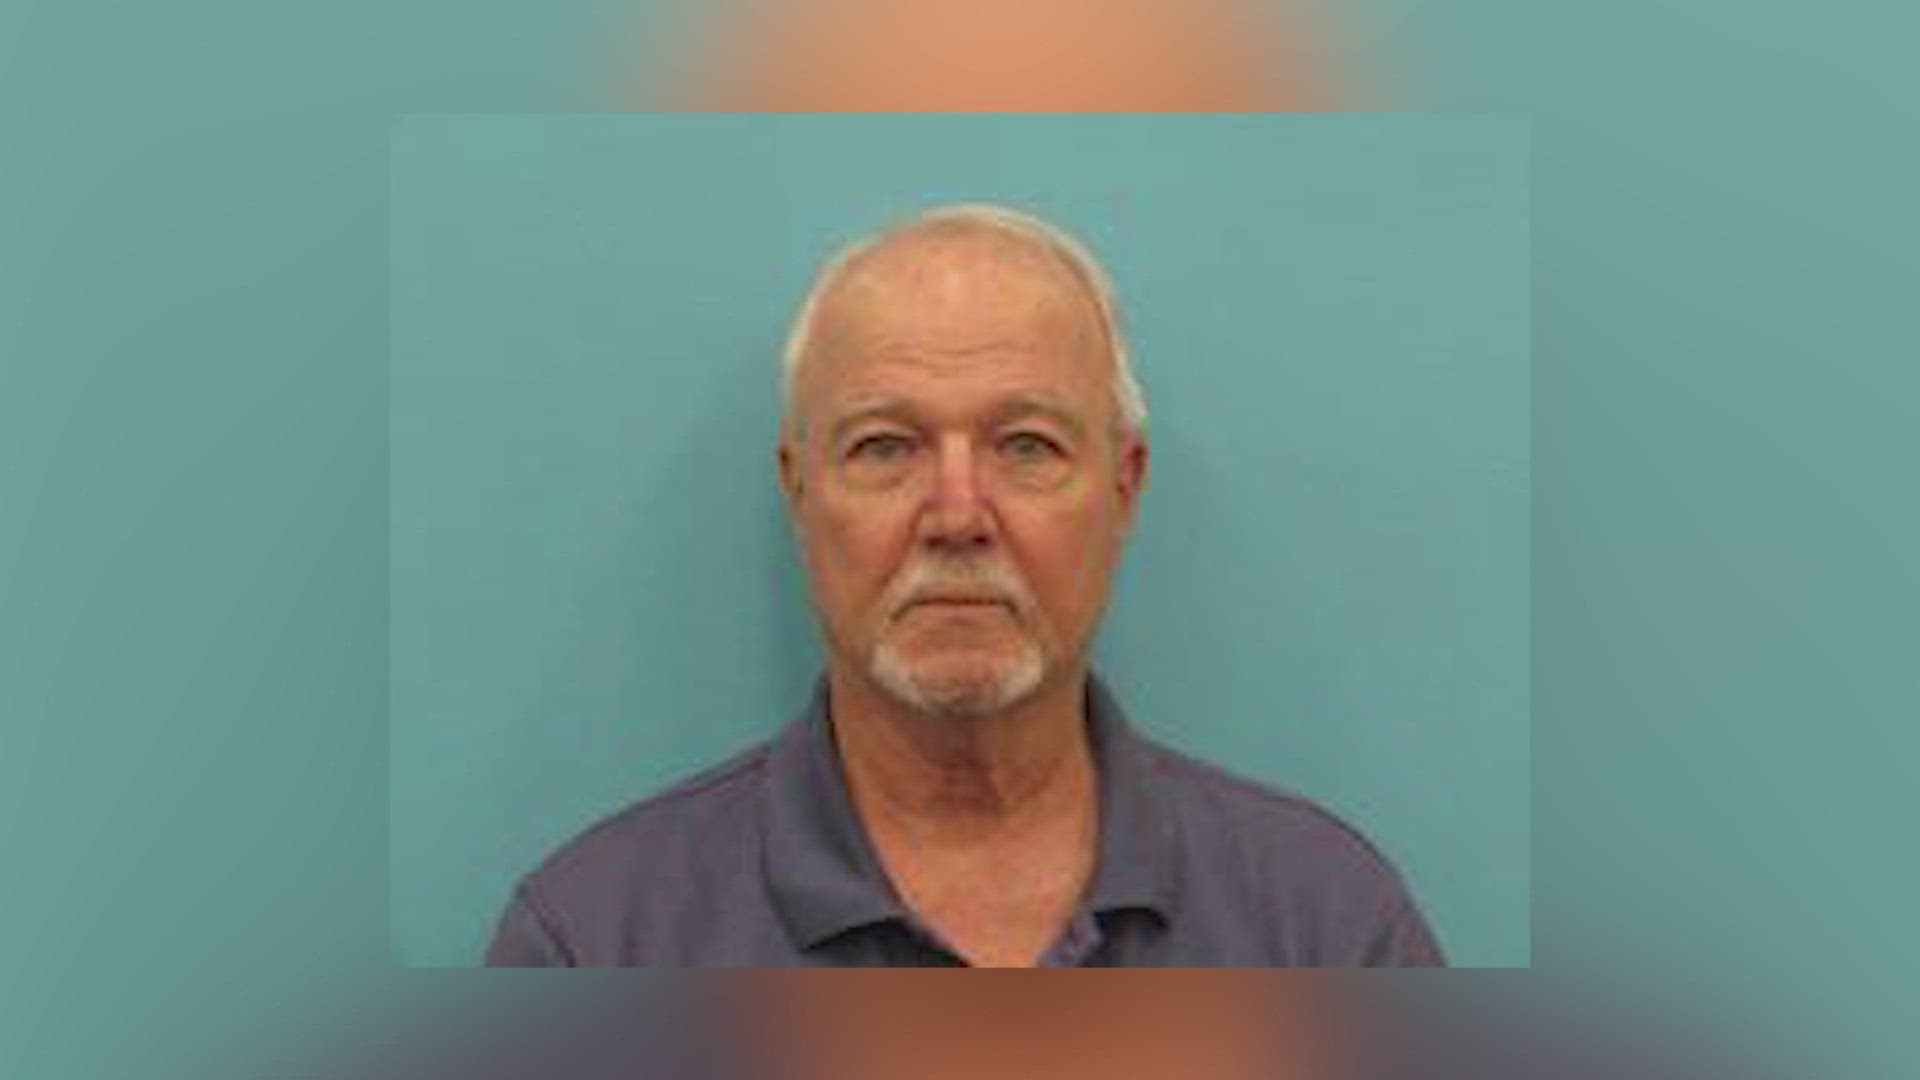 Michael Spiller, 75, was jailed in Kendall County in 2022 after allegations that the coach exposed himself to young girls.